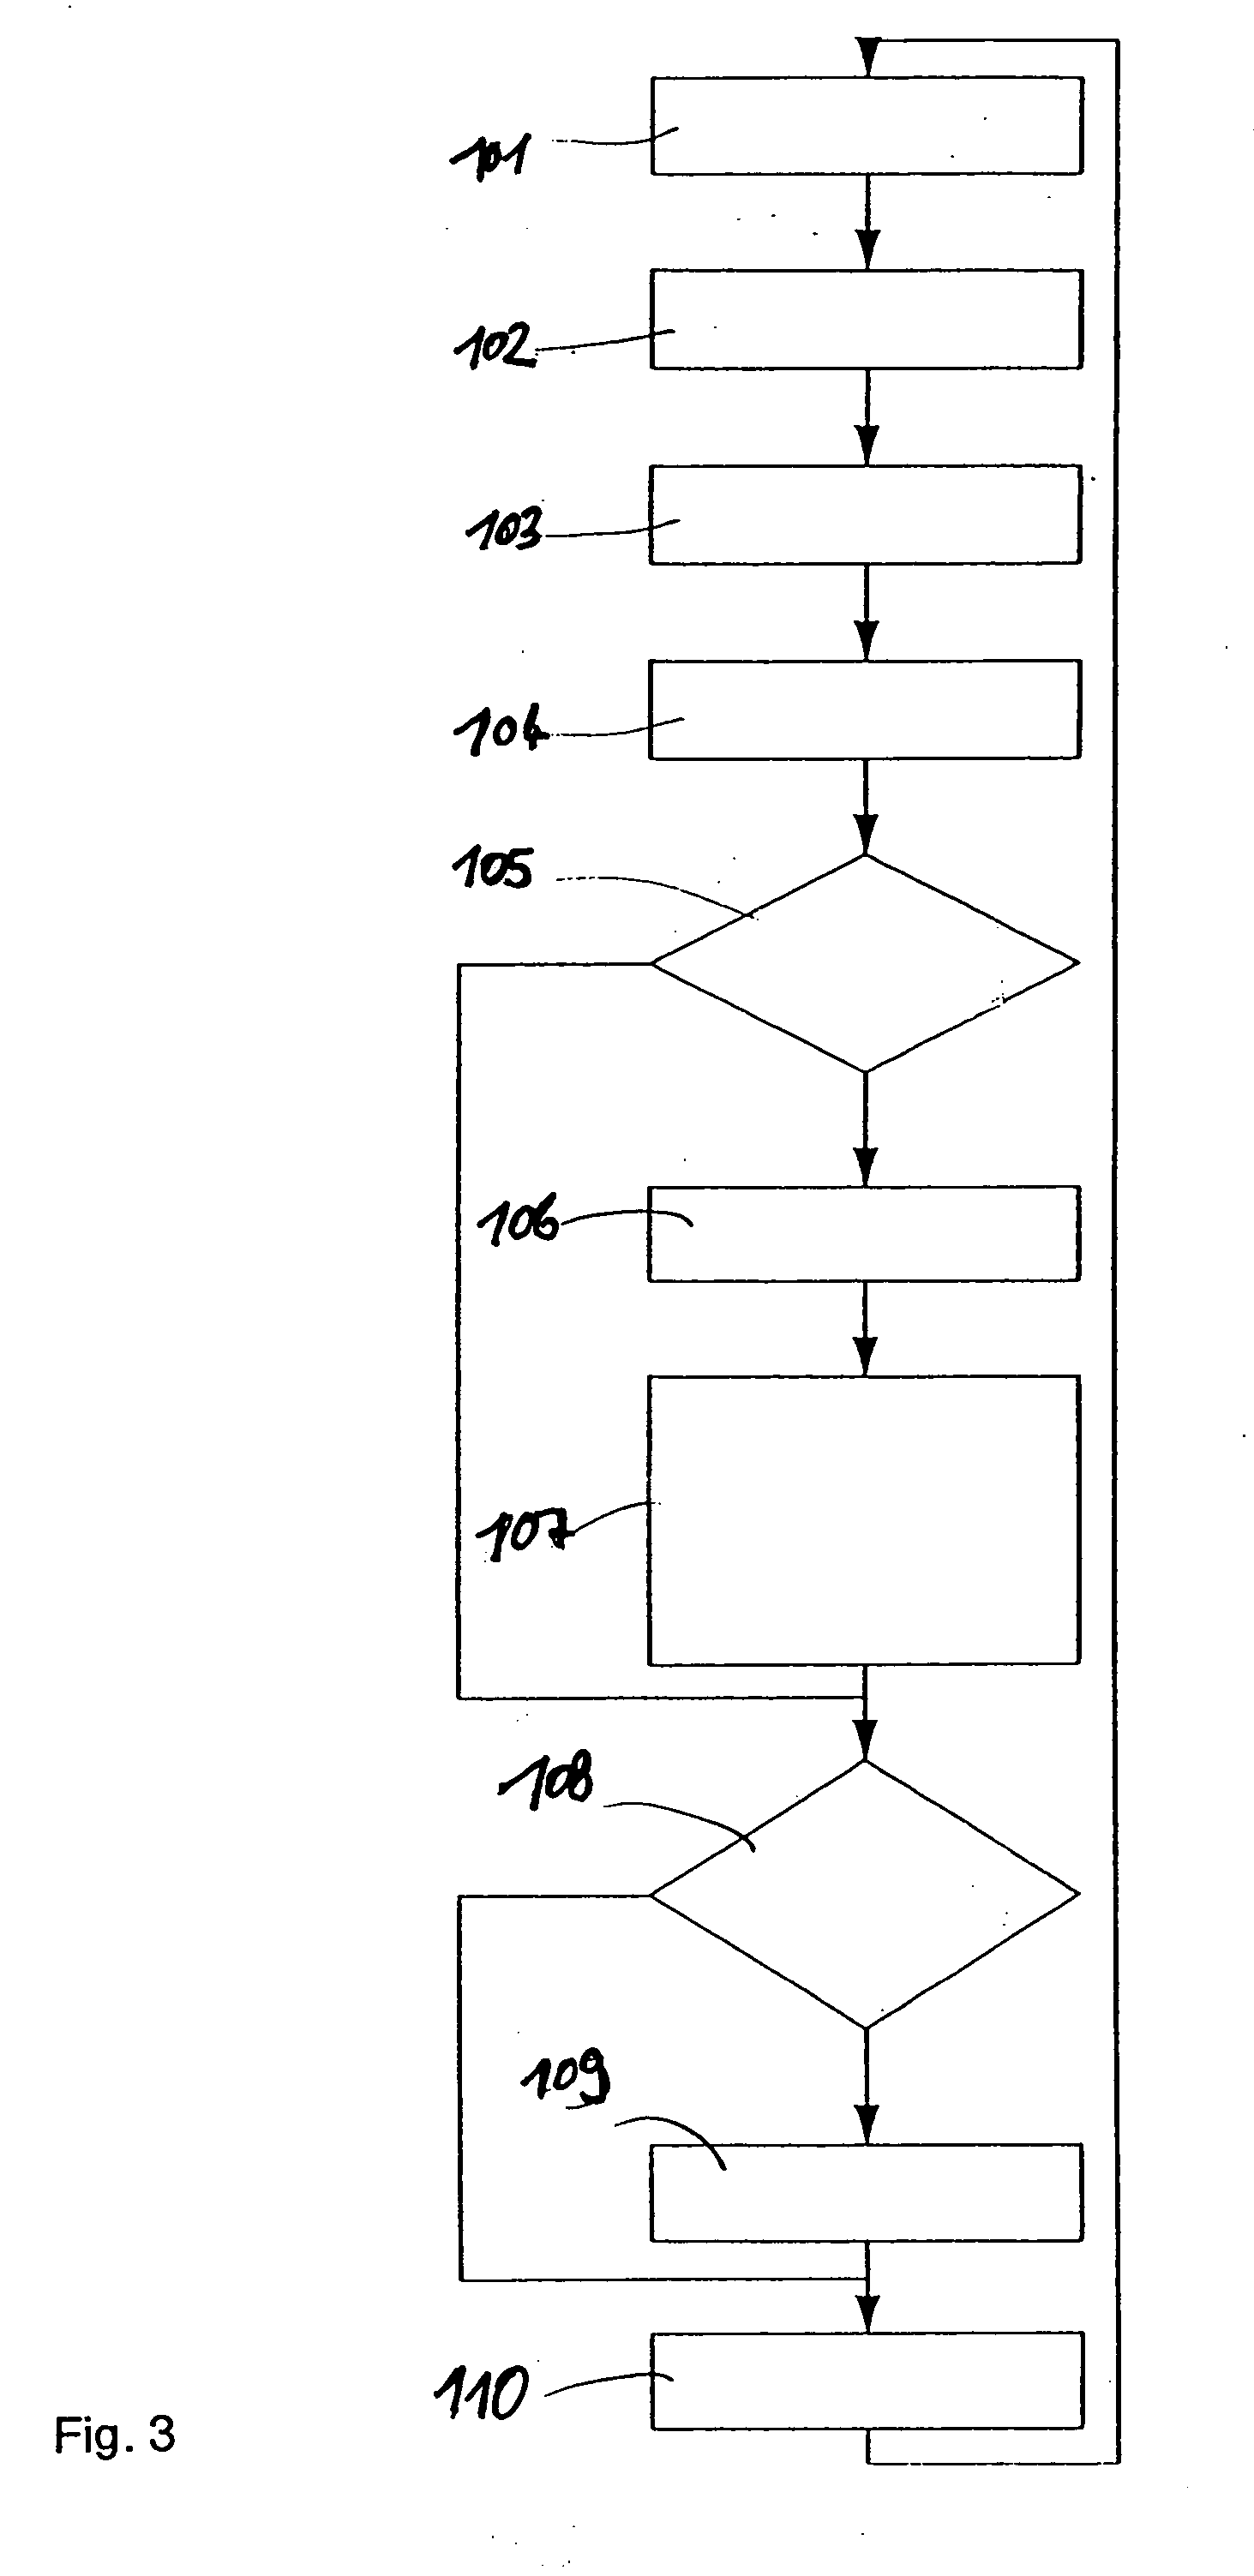 Egg counting device and method